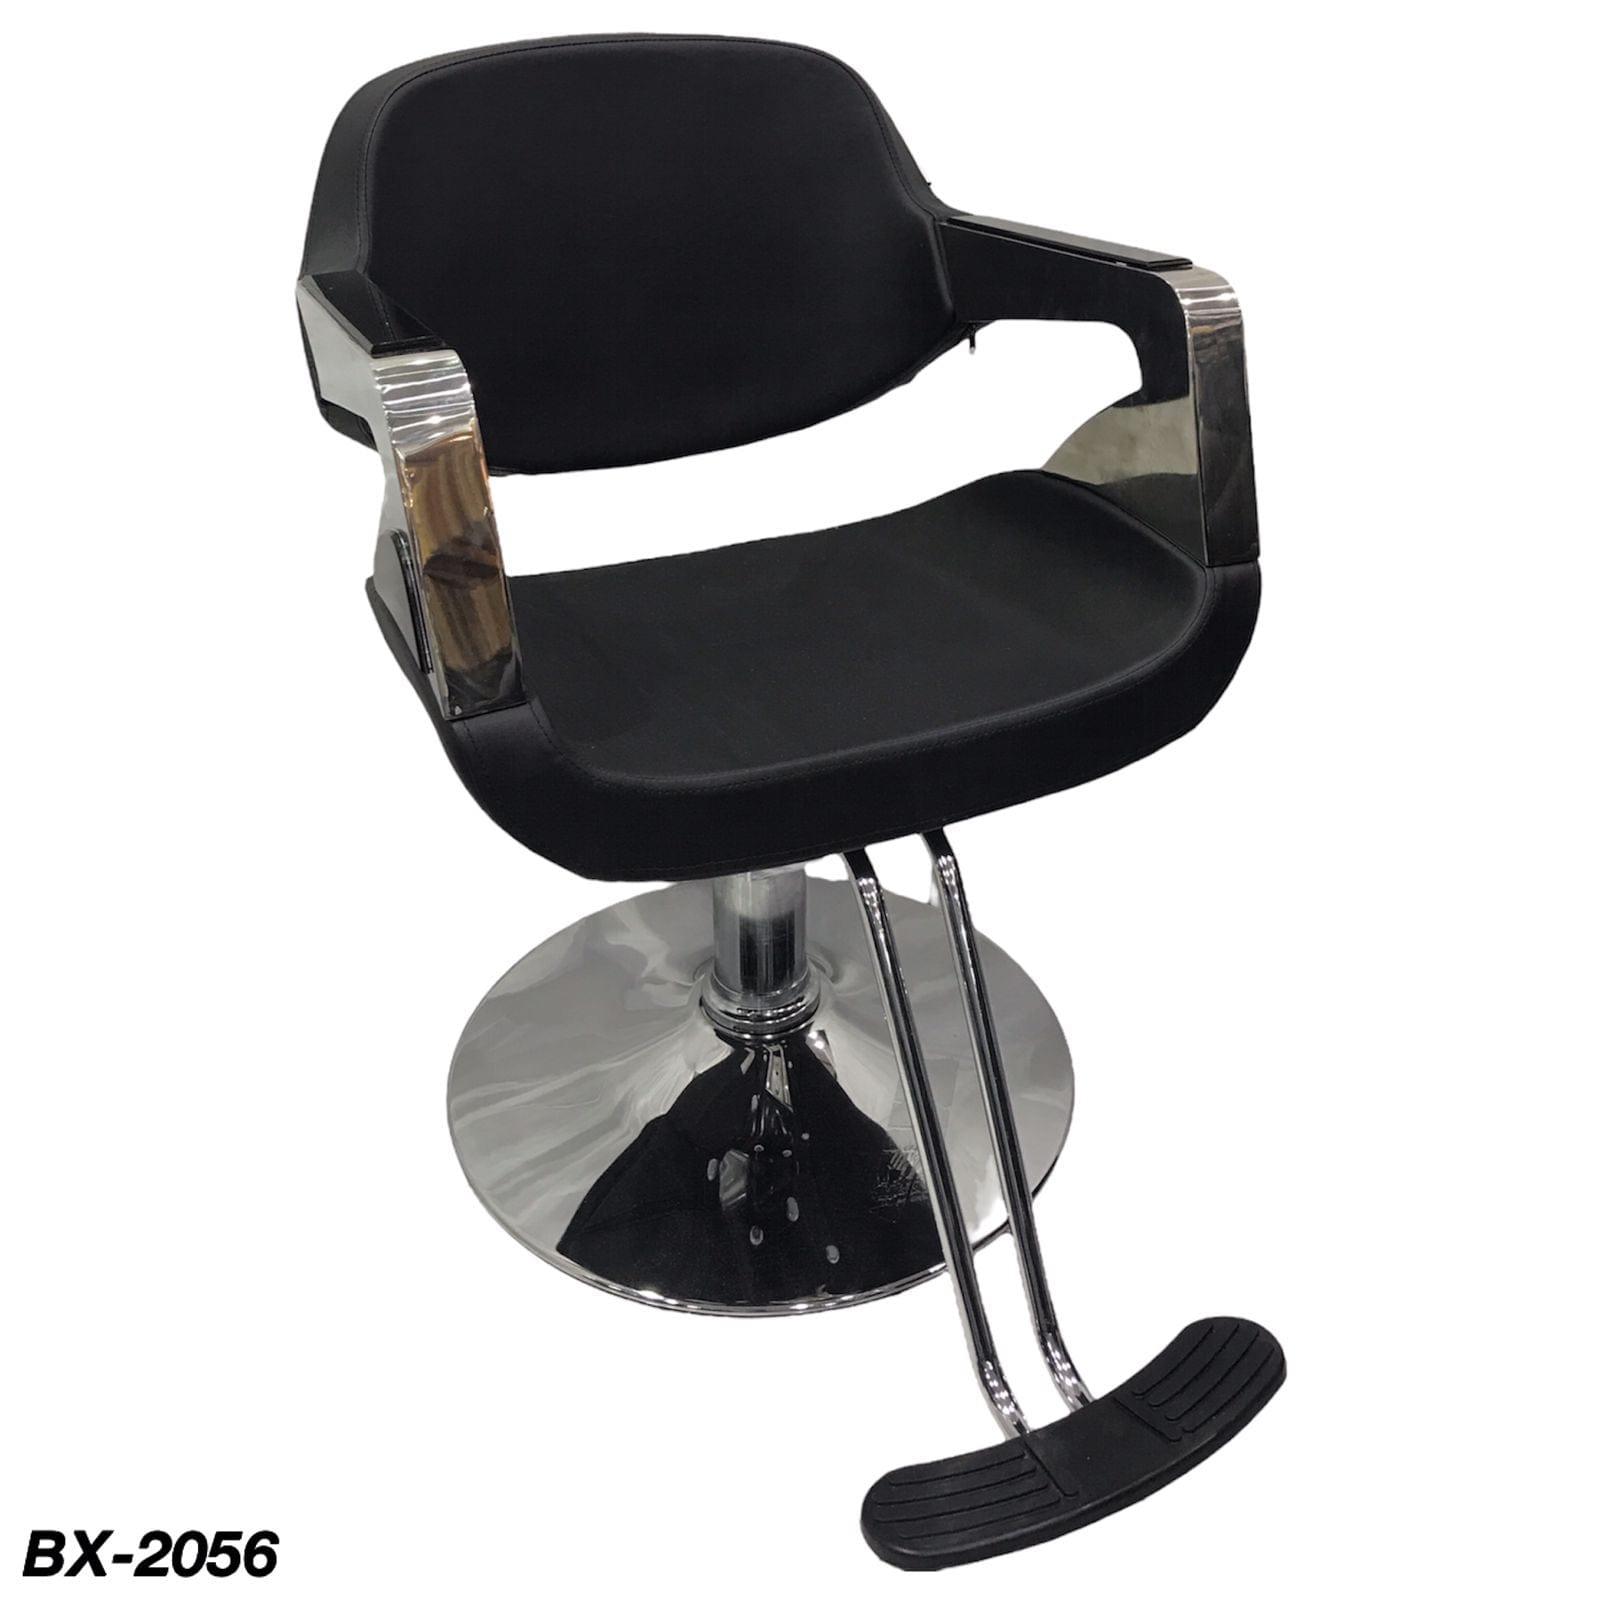 Globalstar Professional Ladies Styling Chair BX-2056